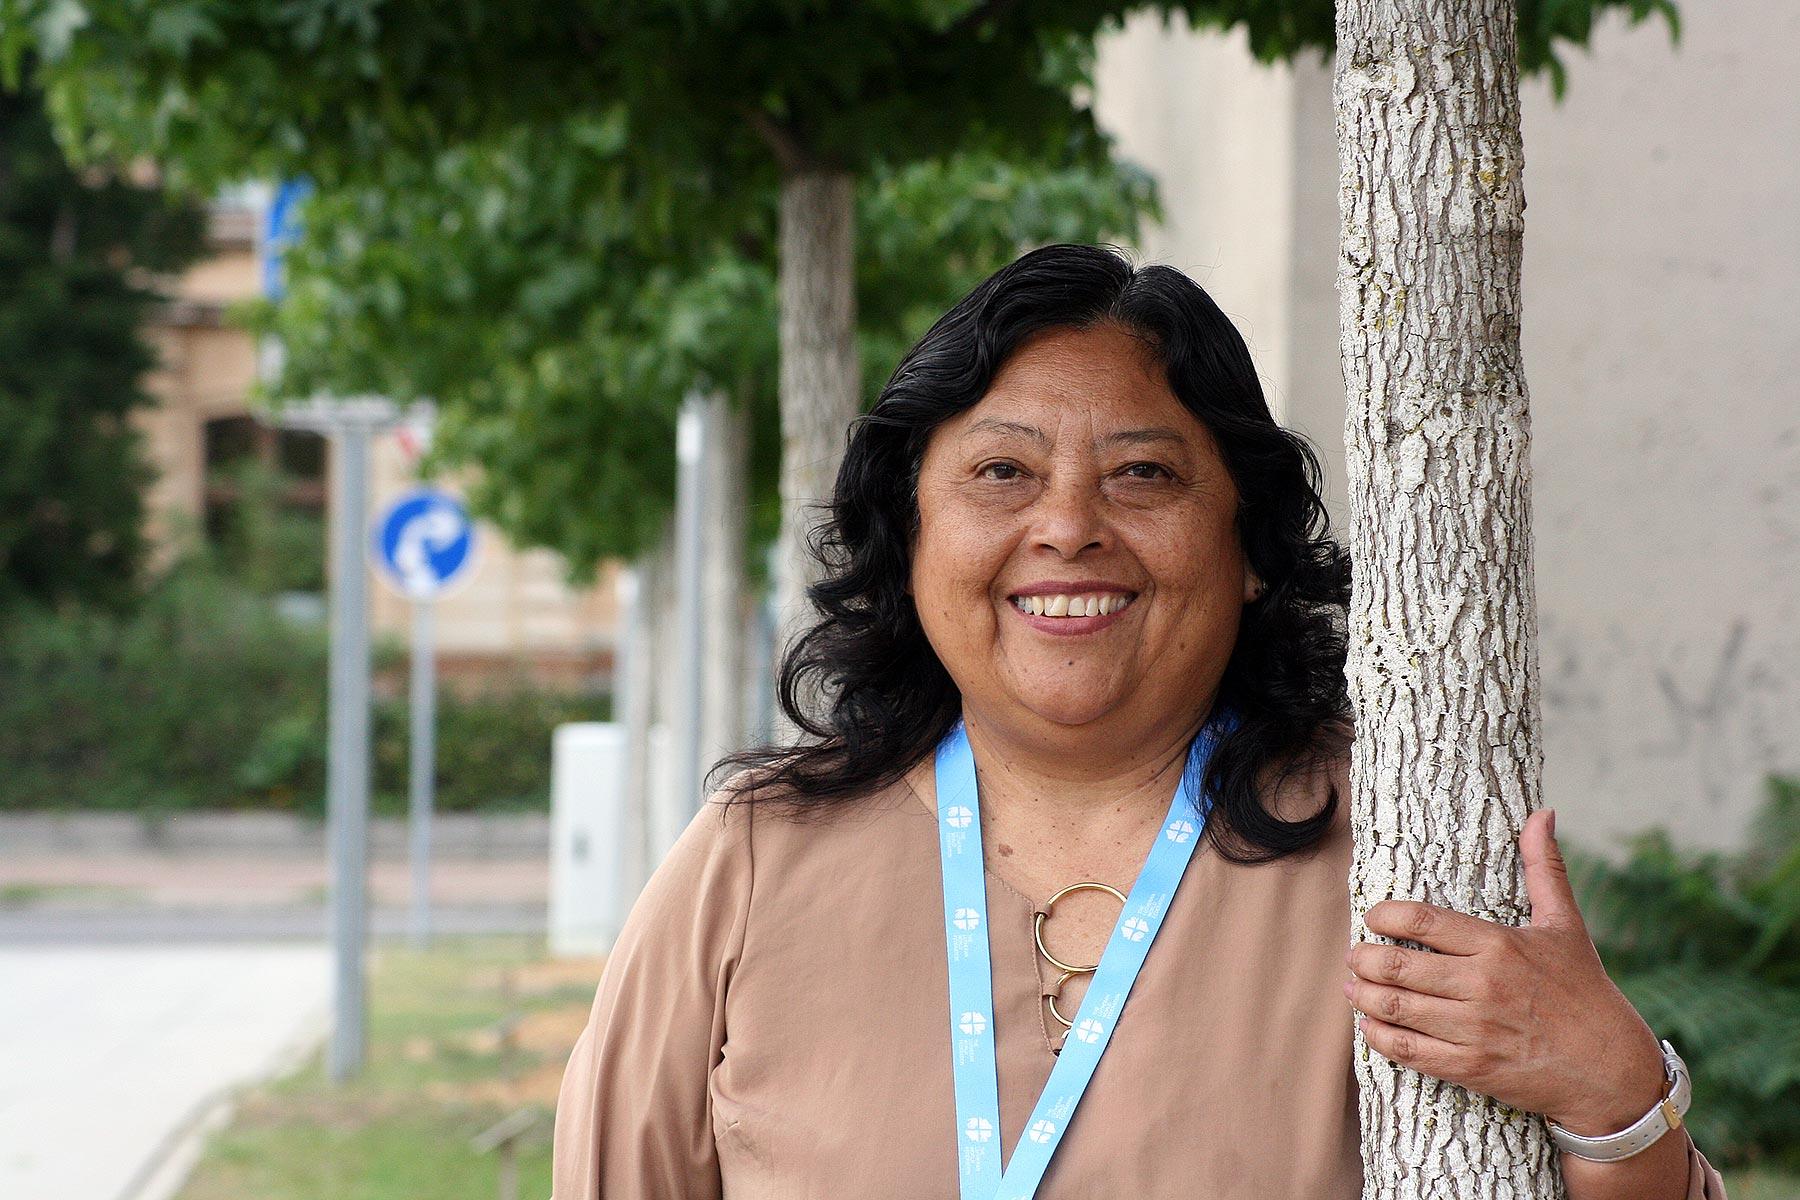 Rev. Adita Torres Lescano, Pastor President of the Lutheran Church of Peru, visiting the tree planted by representatives of her church in the Luthergarten in Wittenberg. This Reformation 2017 project symbolizes the ecumenical relationships of Christian churches worldwide through 500 trees creating a living memorial. Photo: LWF/A. WeyermÃ¼ller